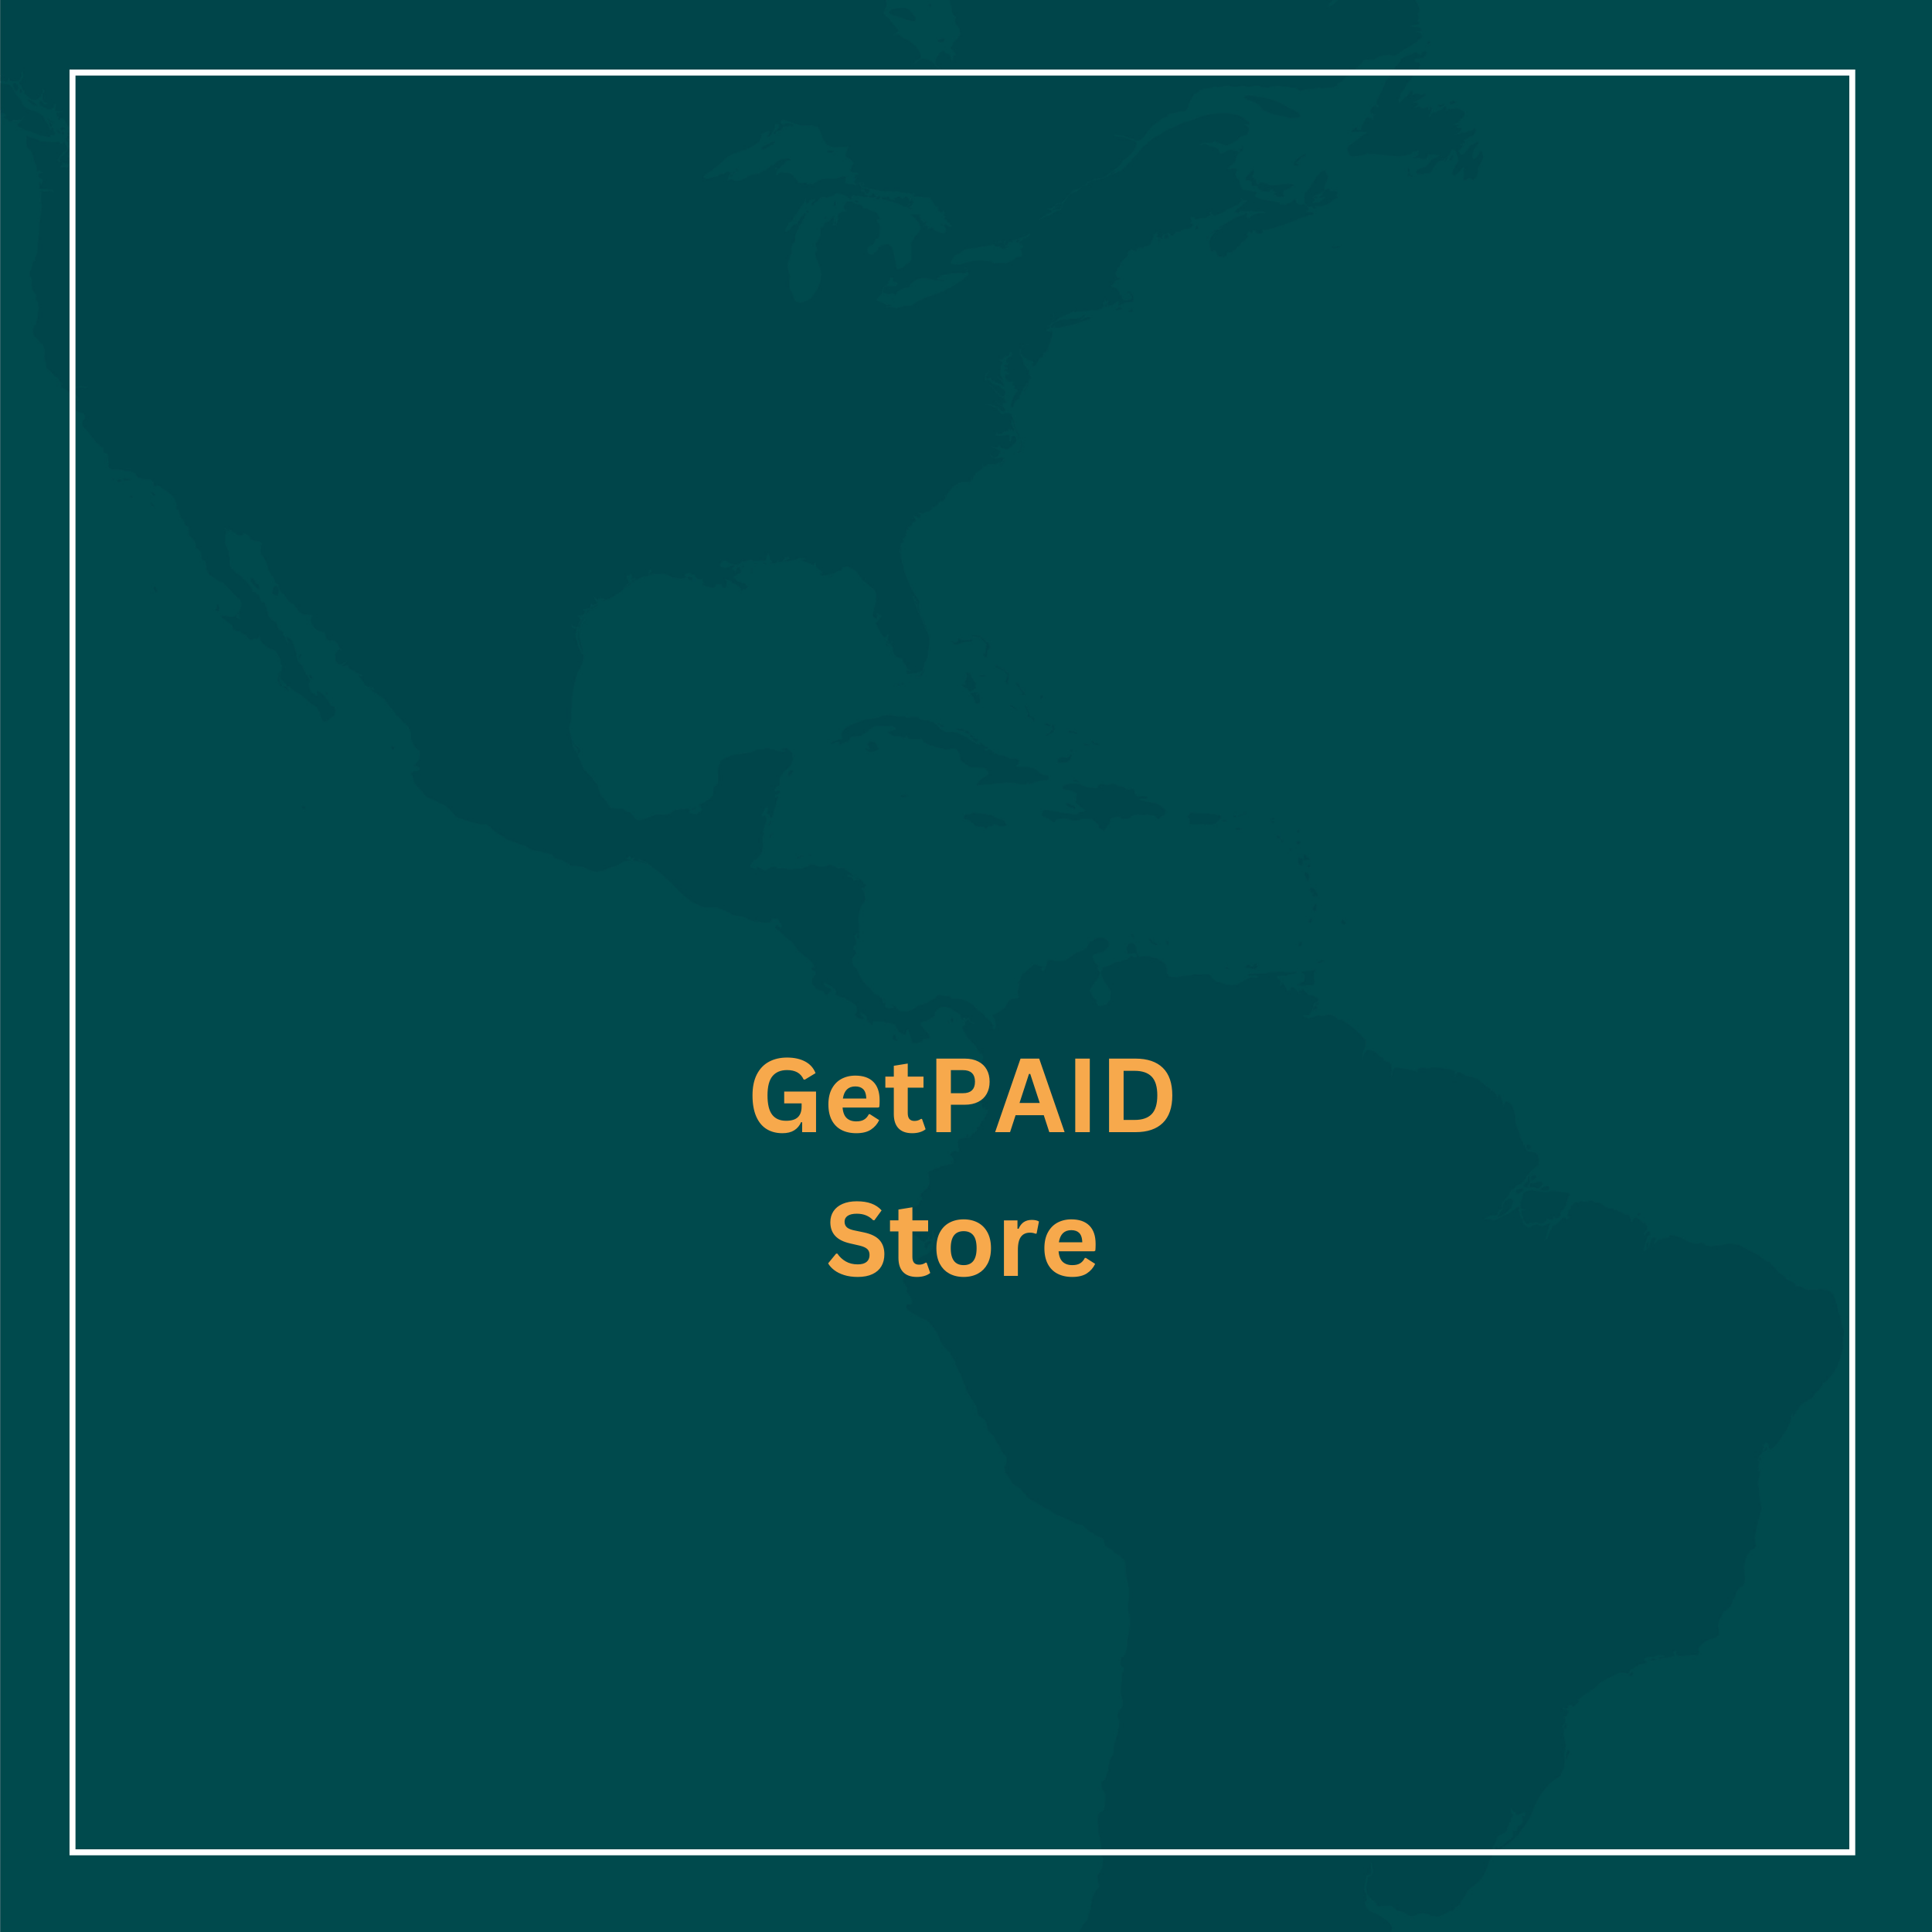 GetPAID Store